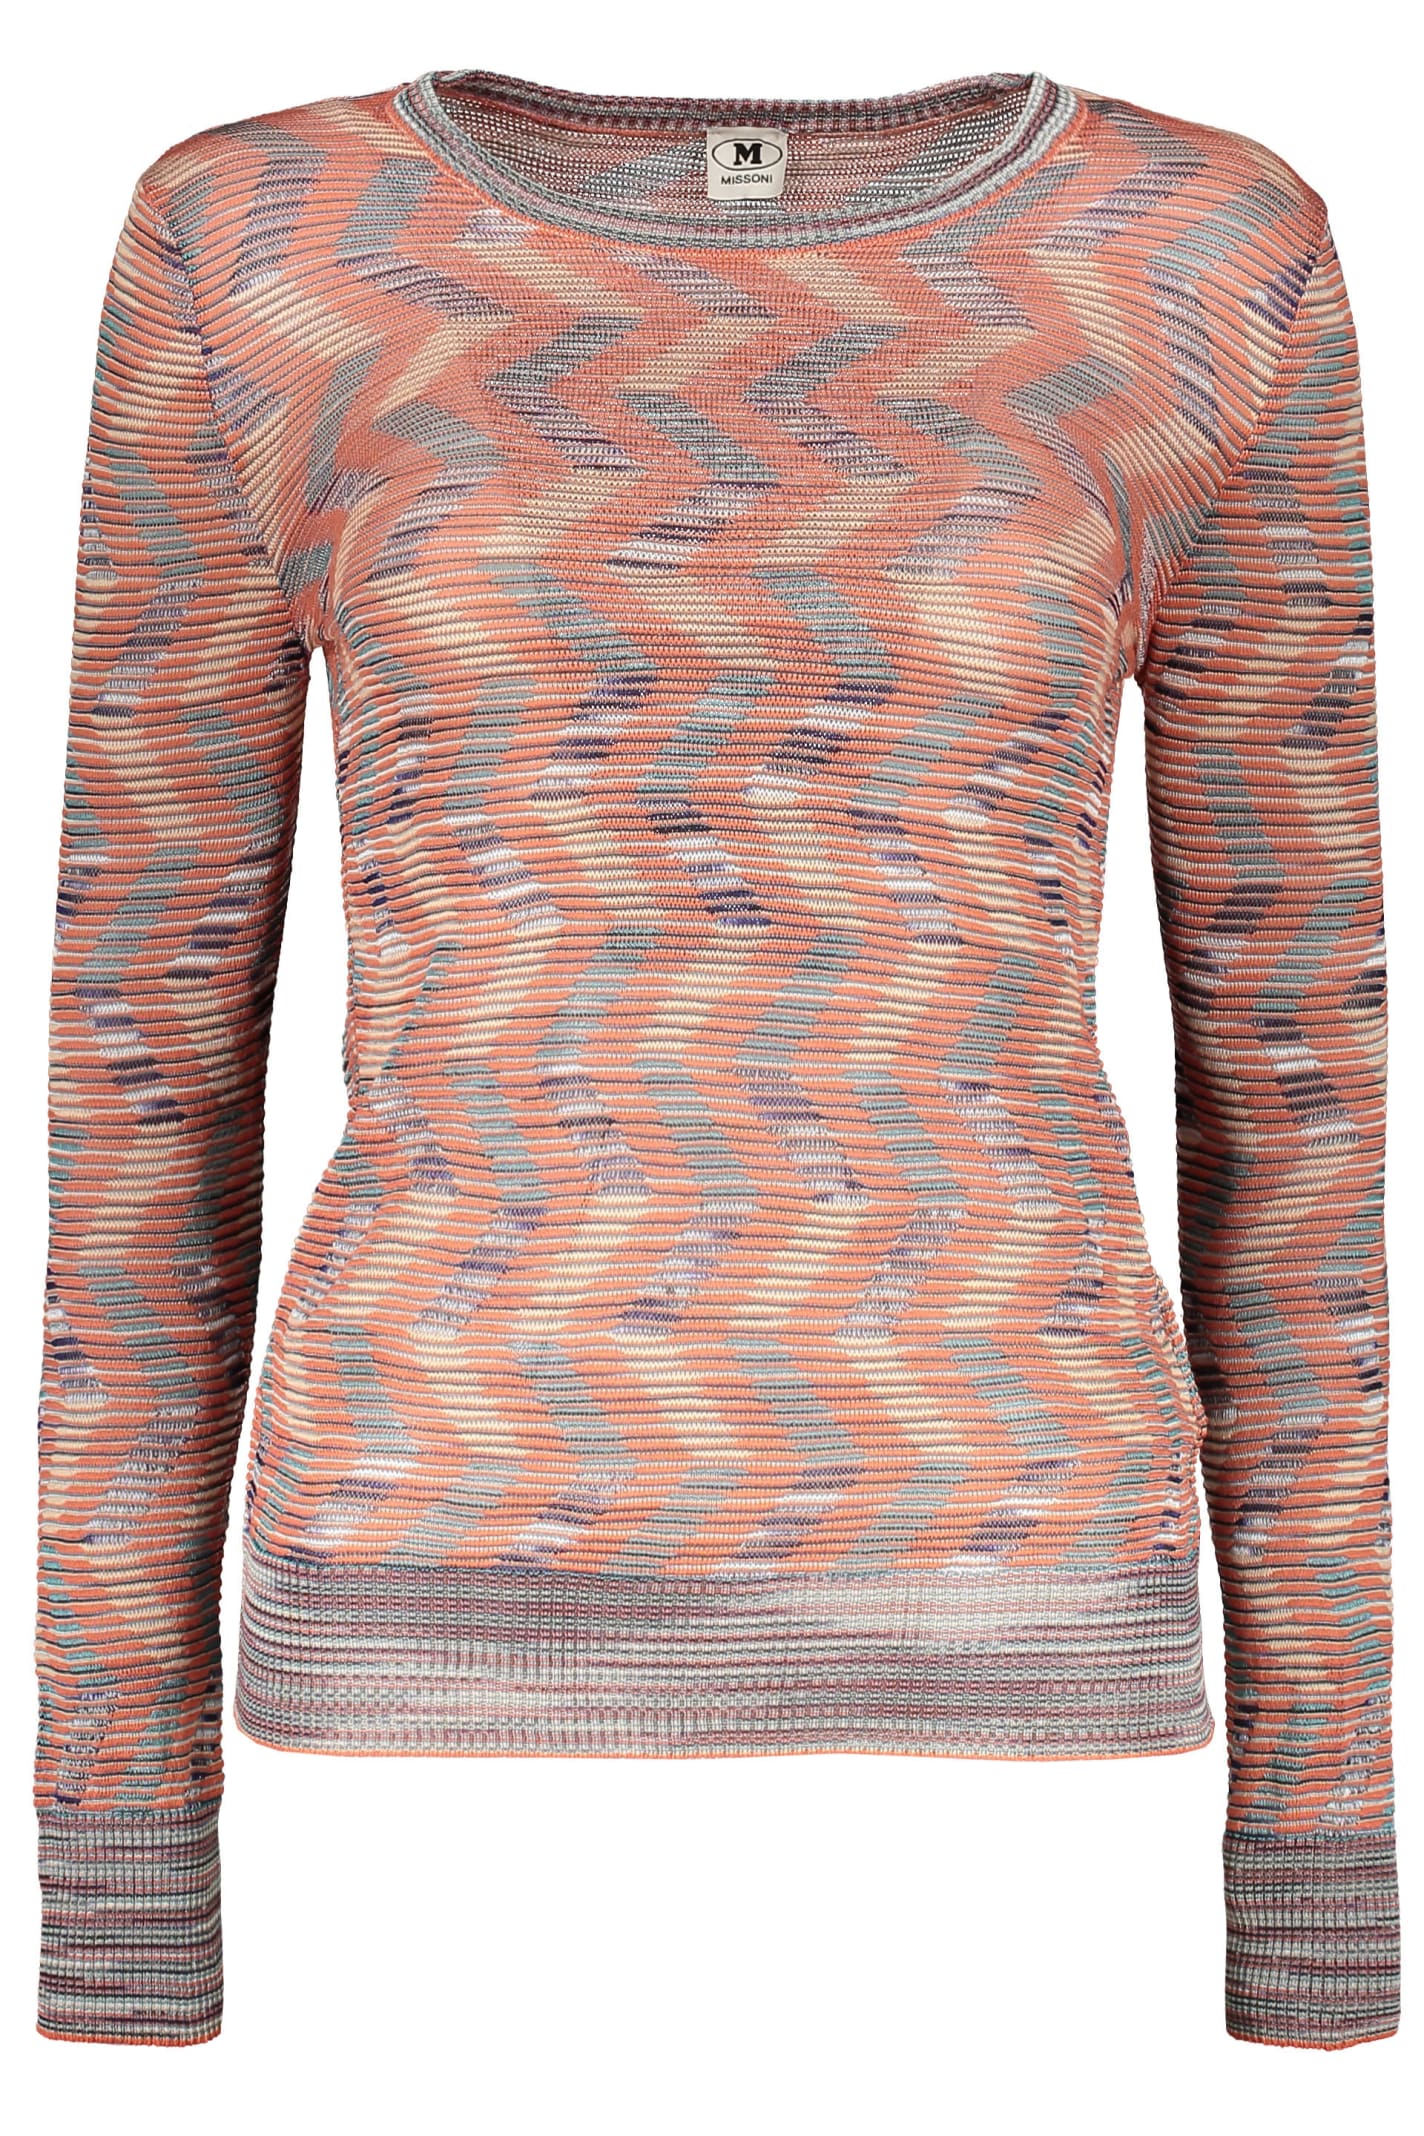 M Missoni Long Sleeve Crew-neck Sweater In Brown